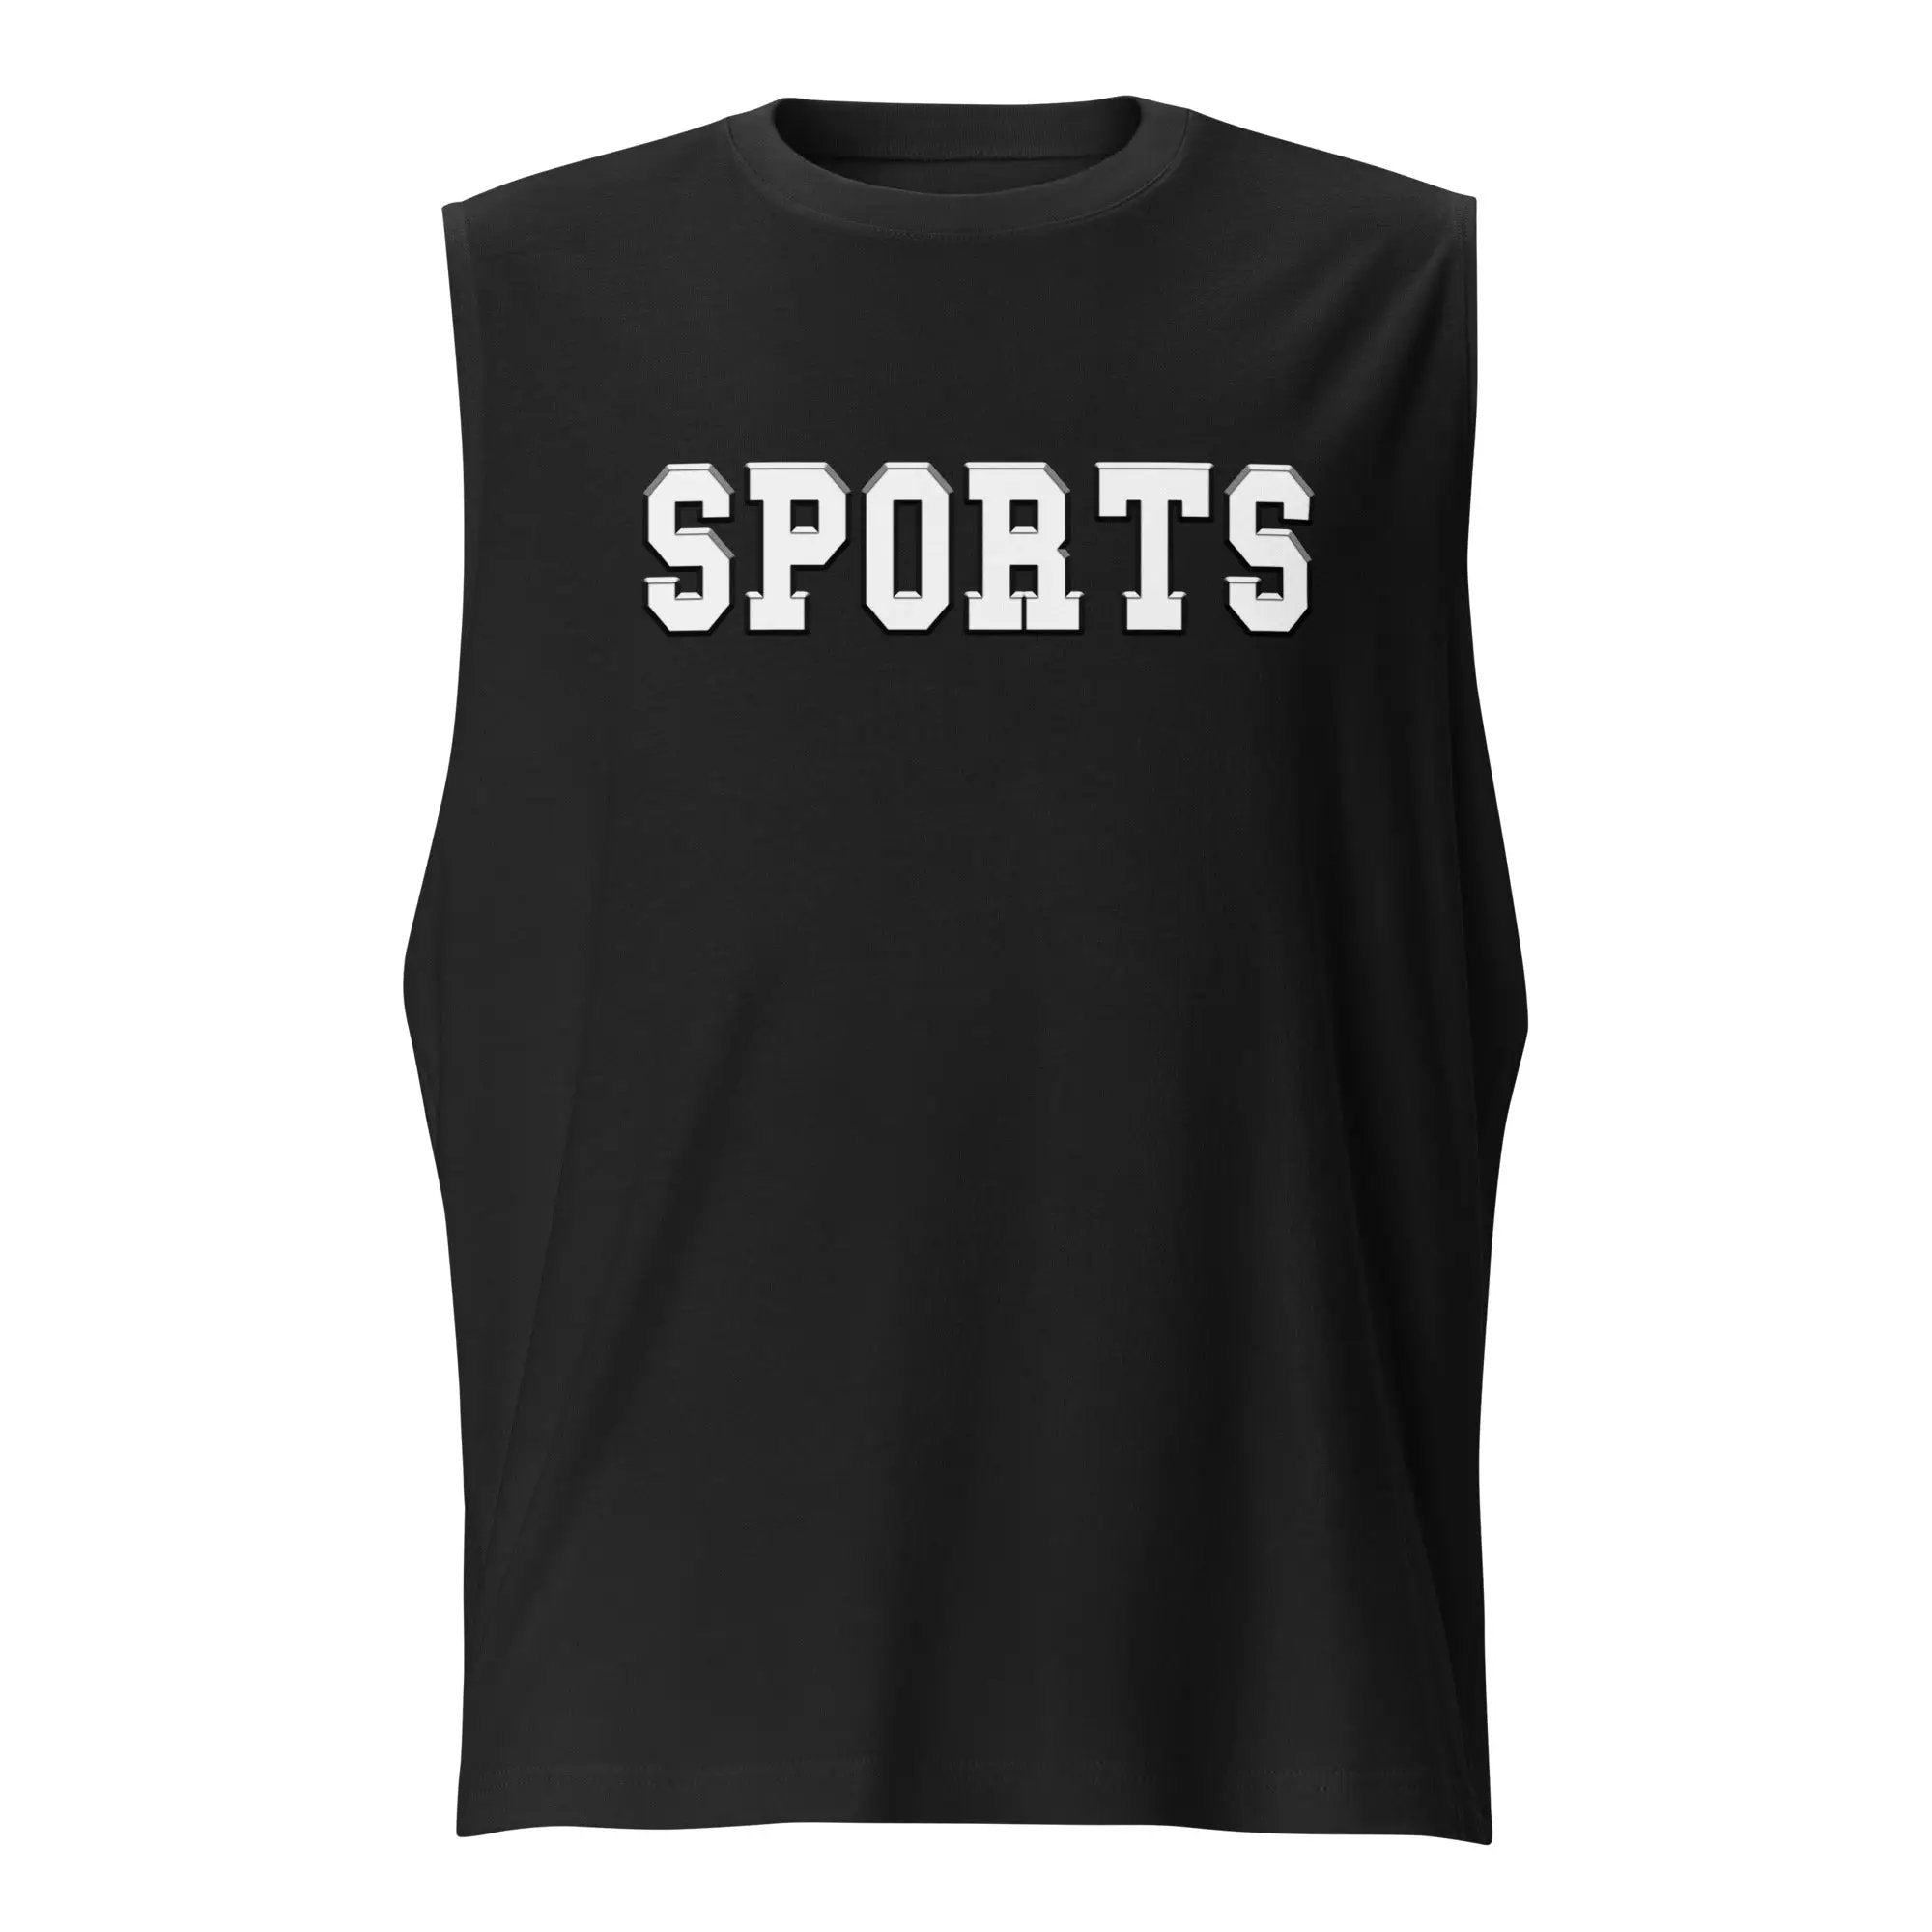 a black shirt with the word sports on it